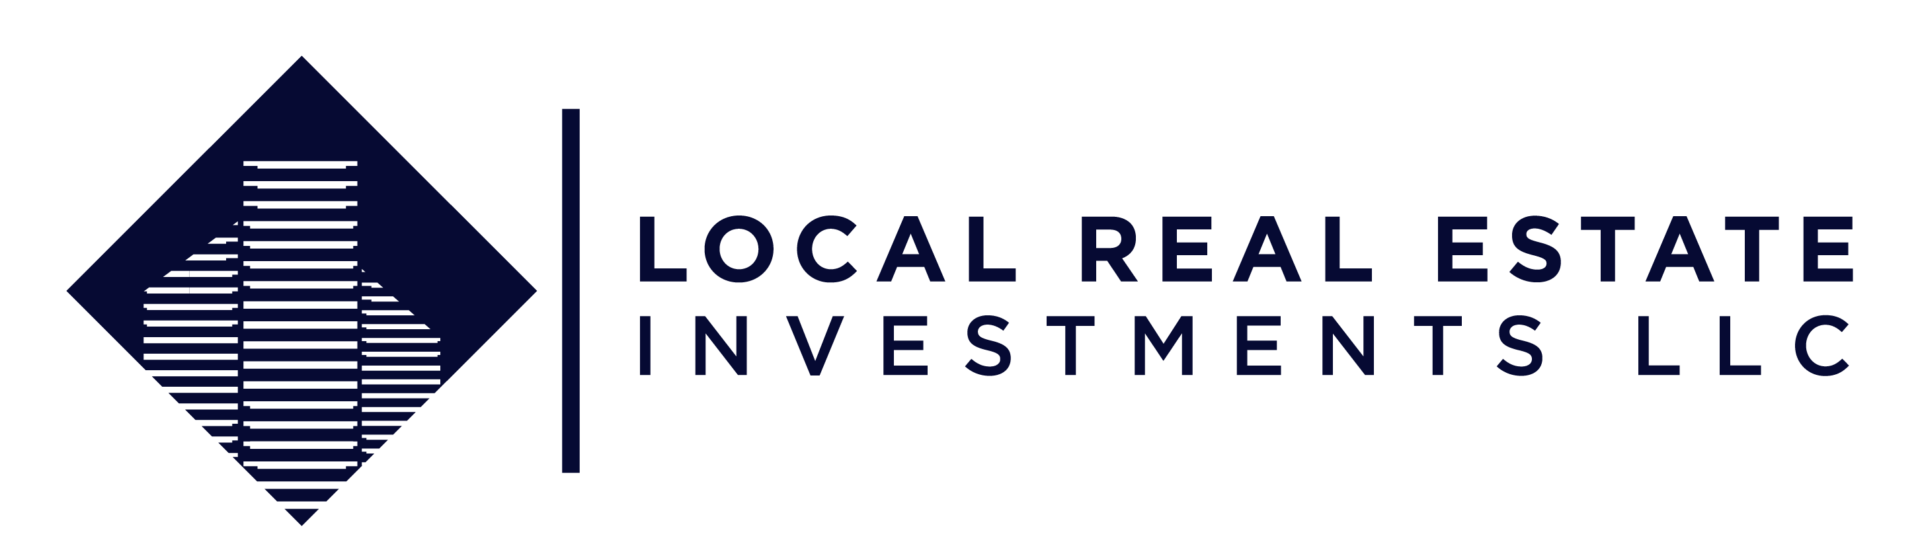 Local Real Estate Investments LLC logo